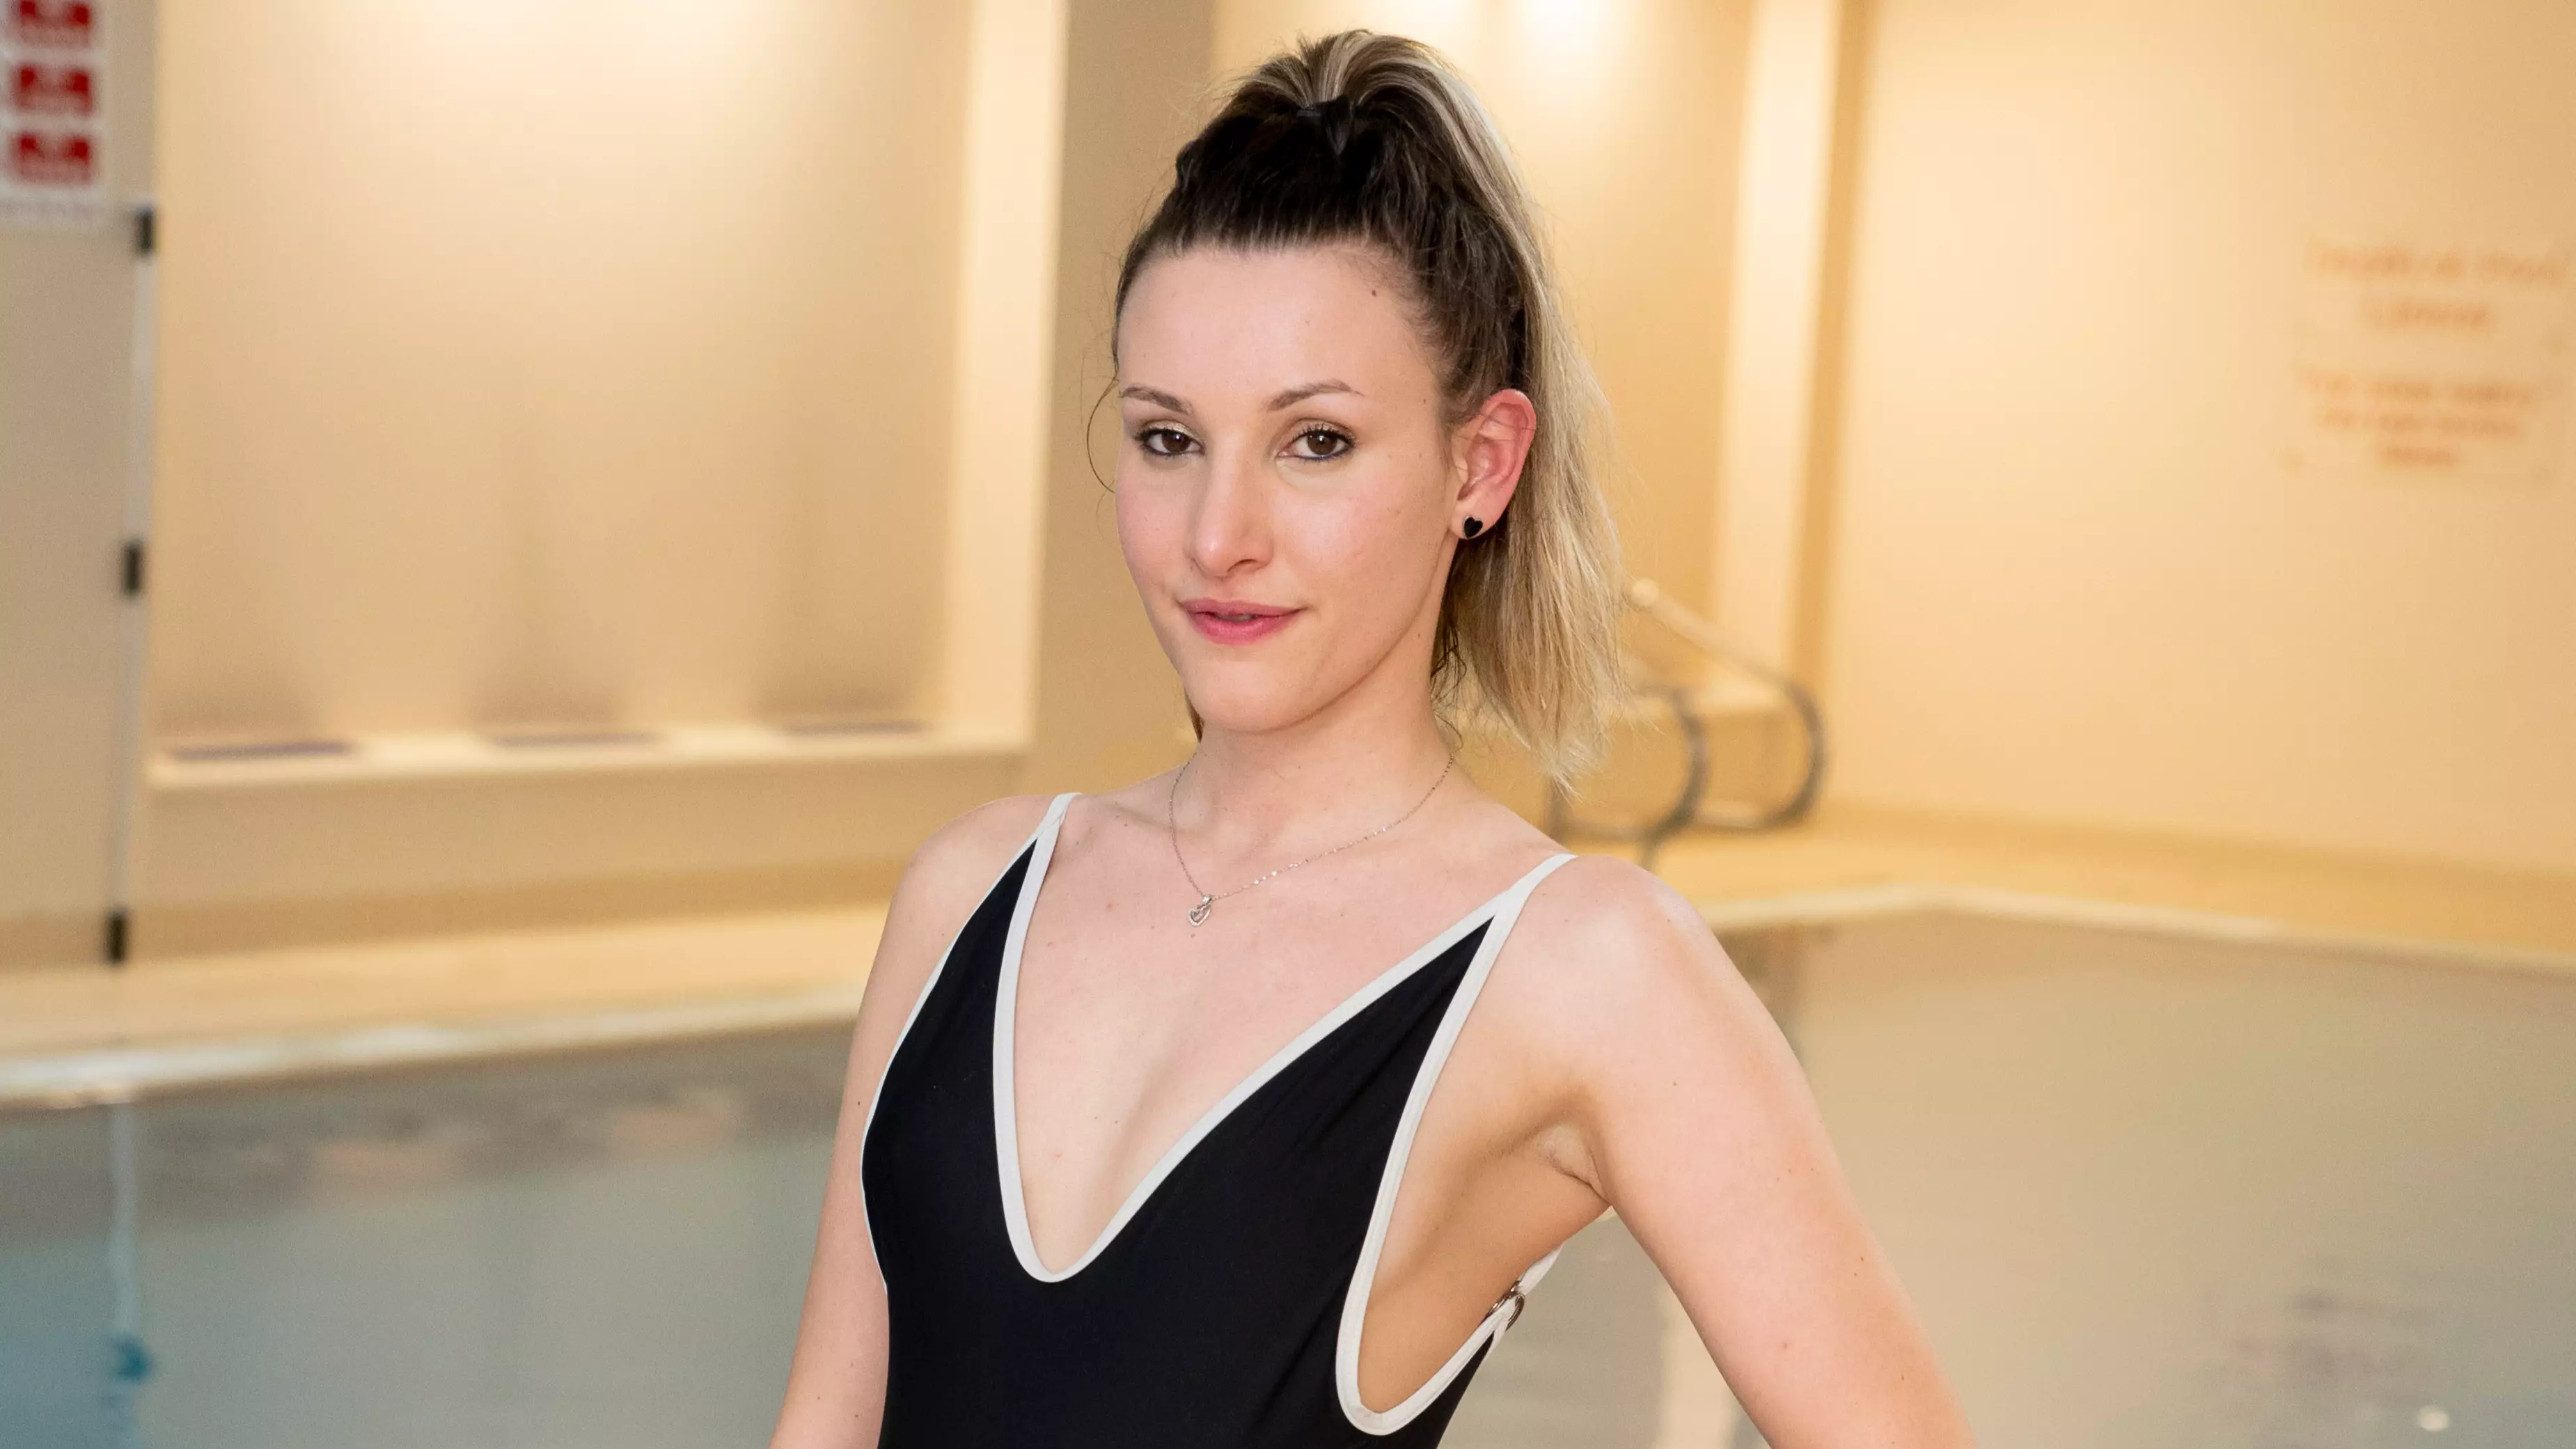 Woman Told To Cover Up At Leisure Centre After Mums Complain About Costume